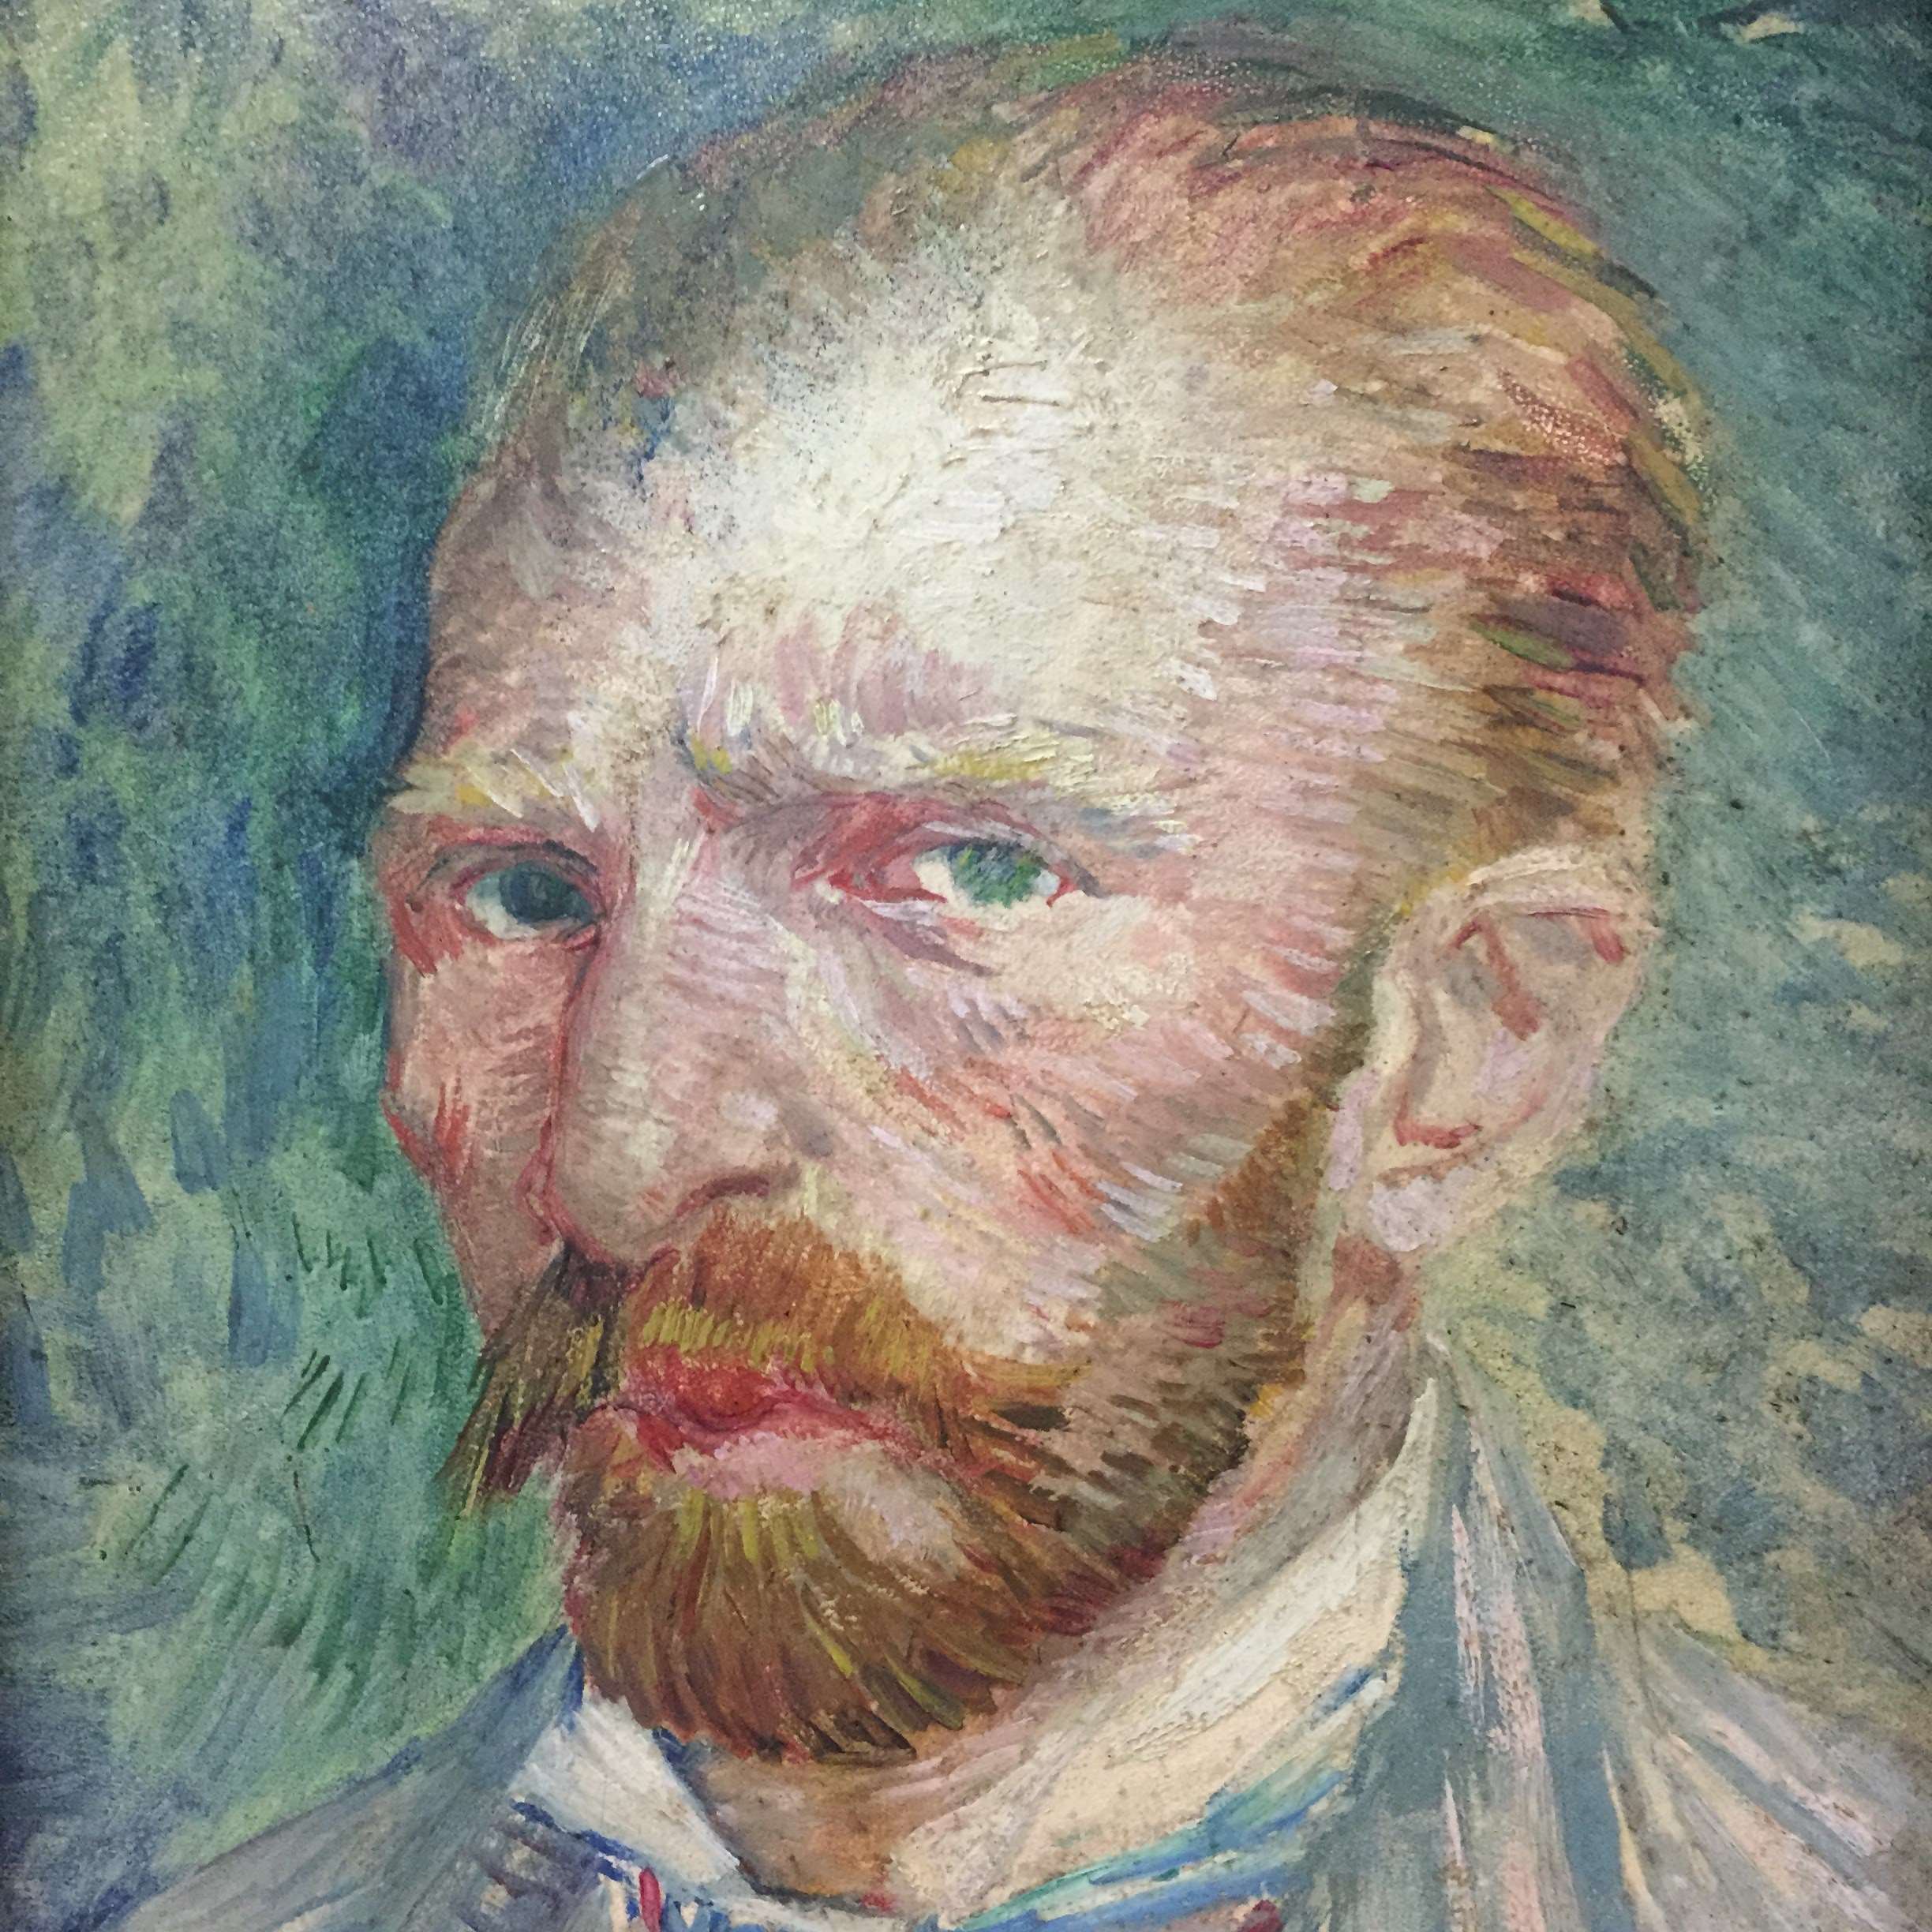 The Kröller-Müller also happens to house the second largest Van Gogh collection in the world